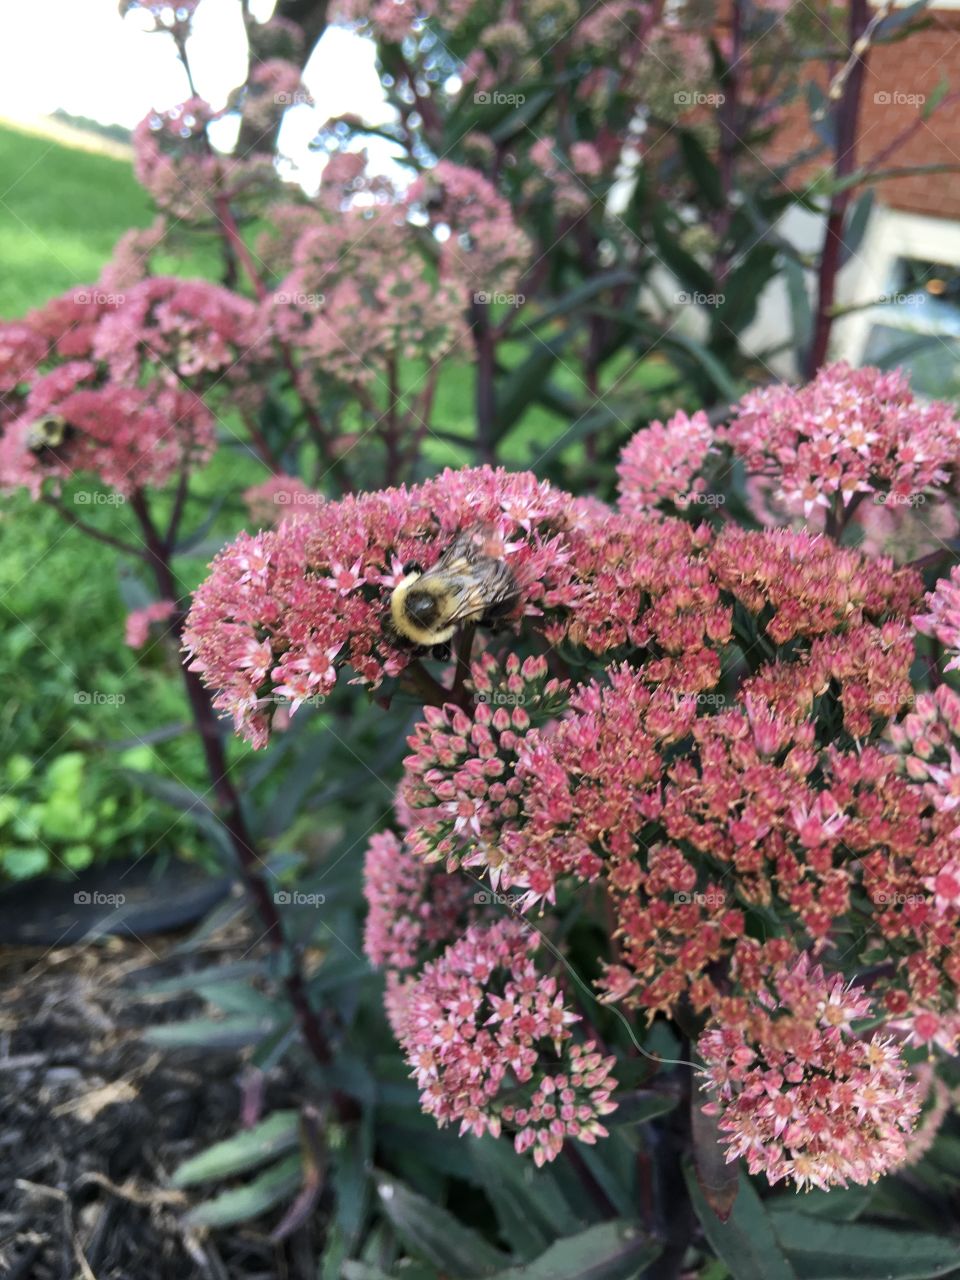 Bumble bee nectar
Sedum with a bumble bee
Sweet spring time
Lunch is in bloom